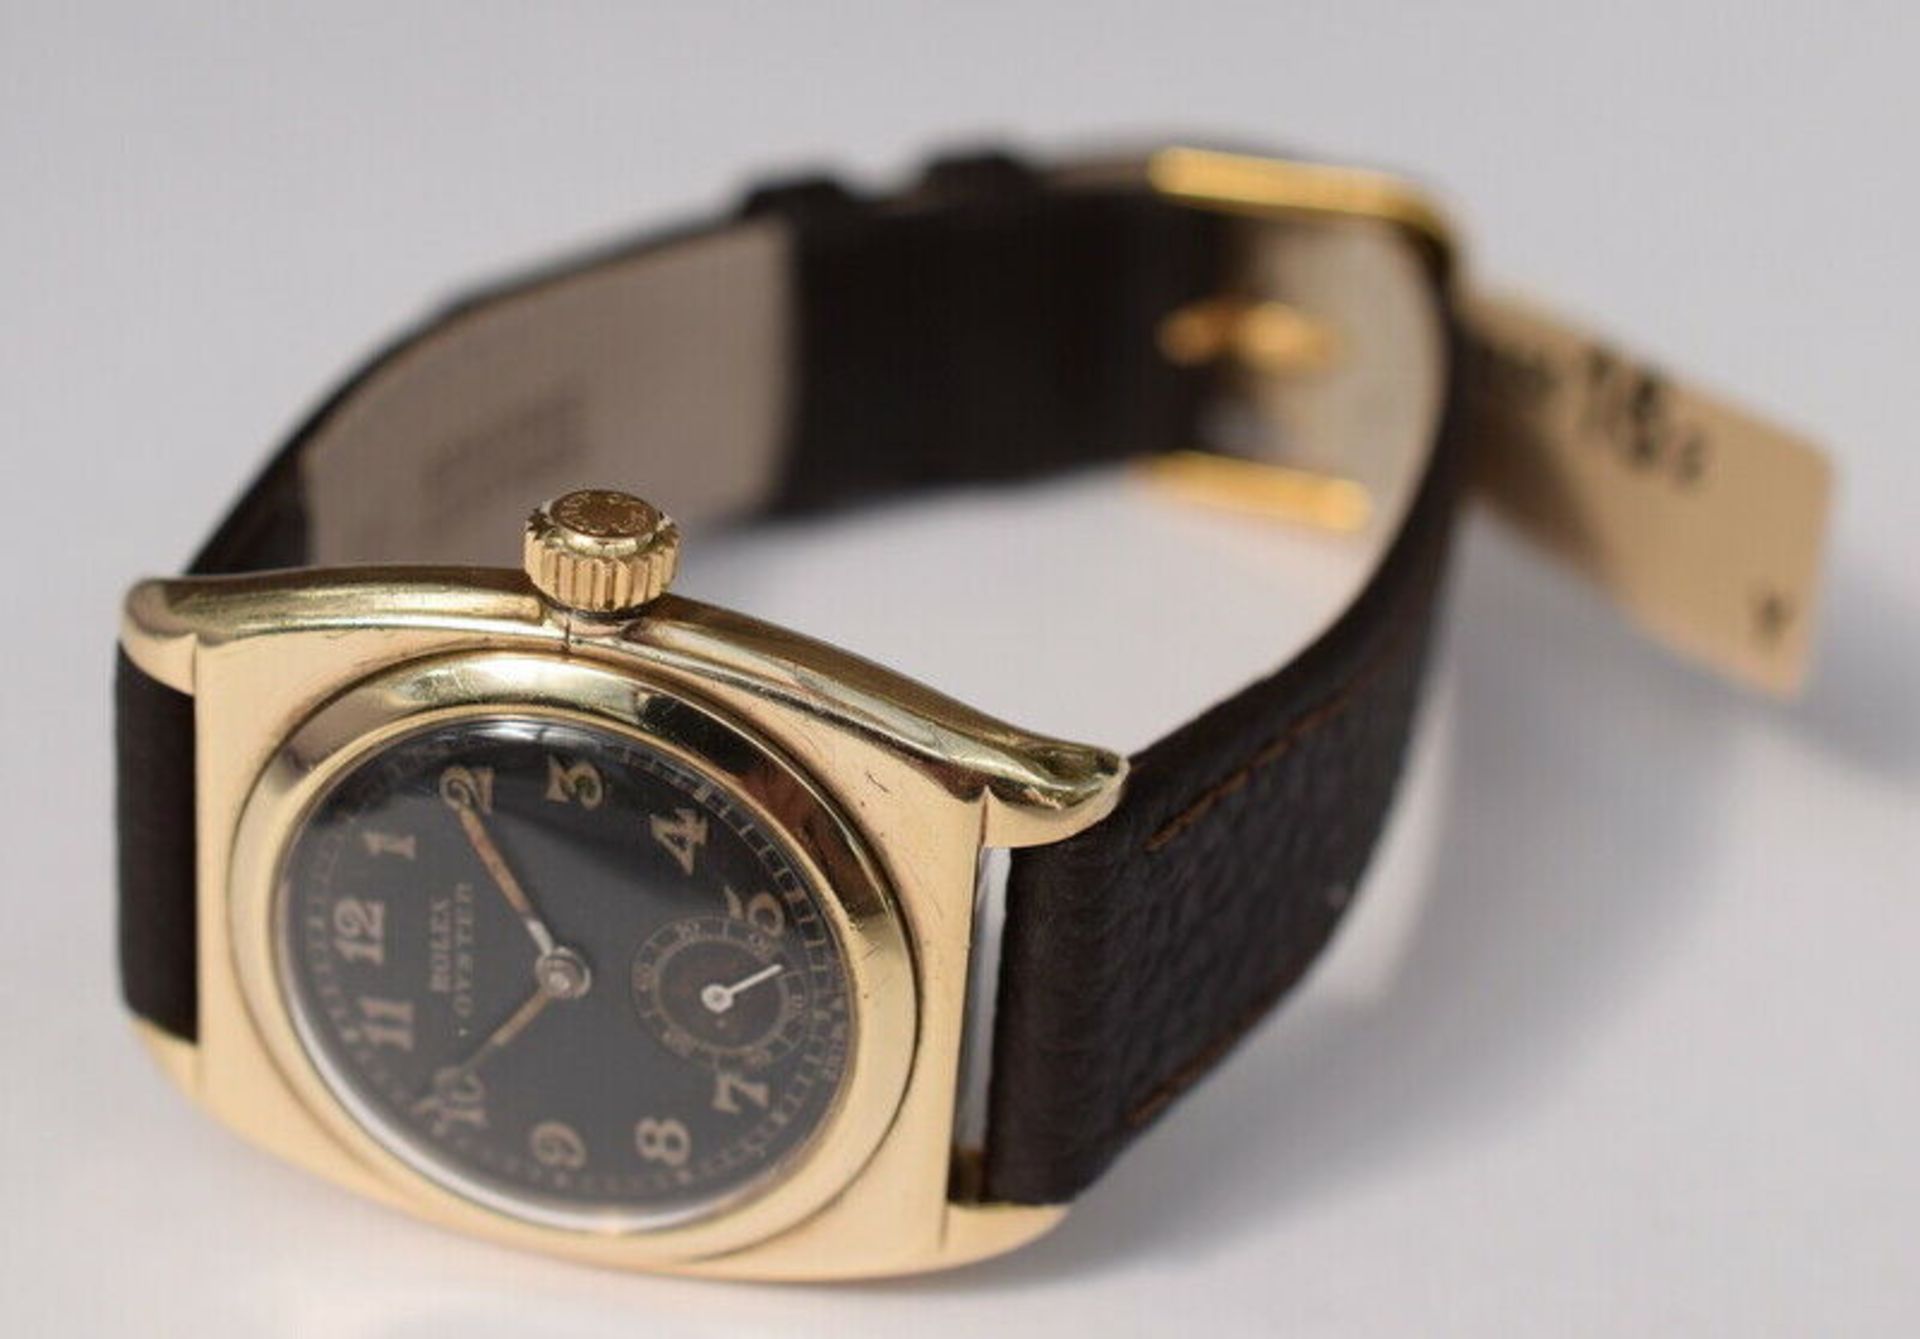 Rare Black Dial Rolex Oyster Viceroy 9ct Gold 1933 Chronometer - Image 3 of 11